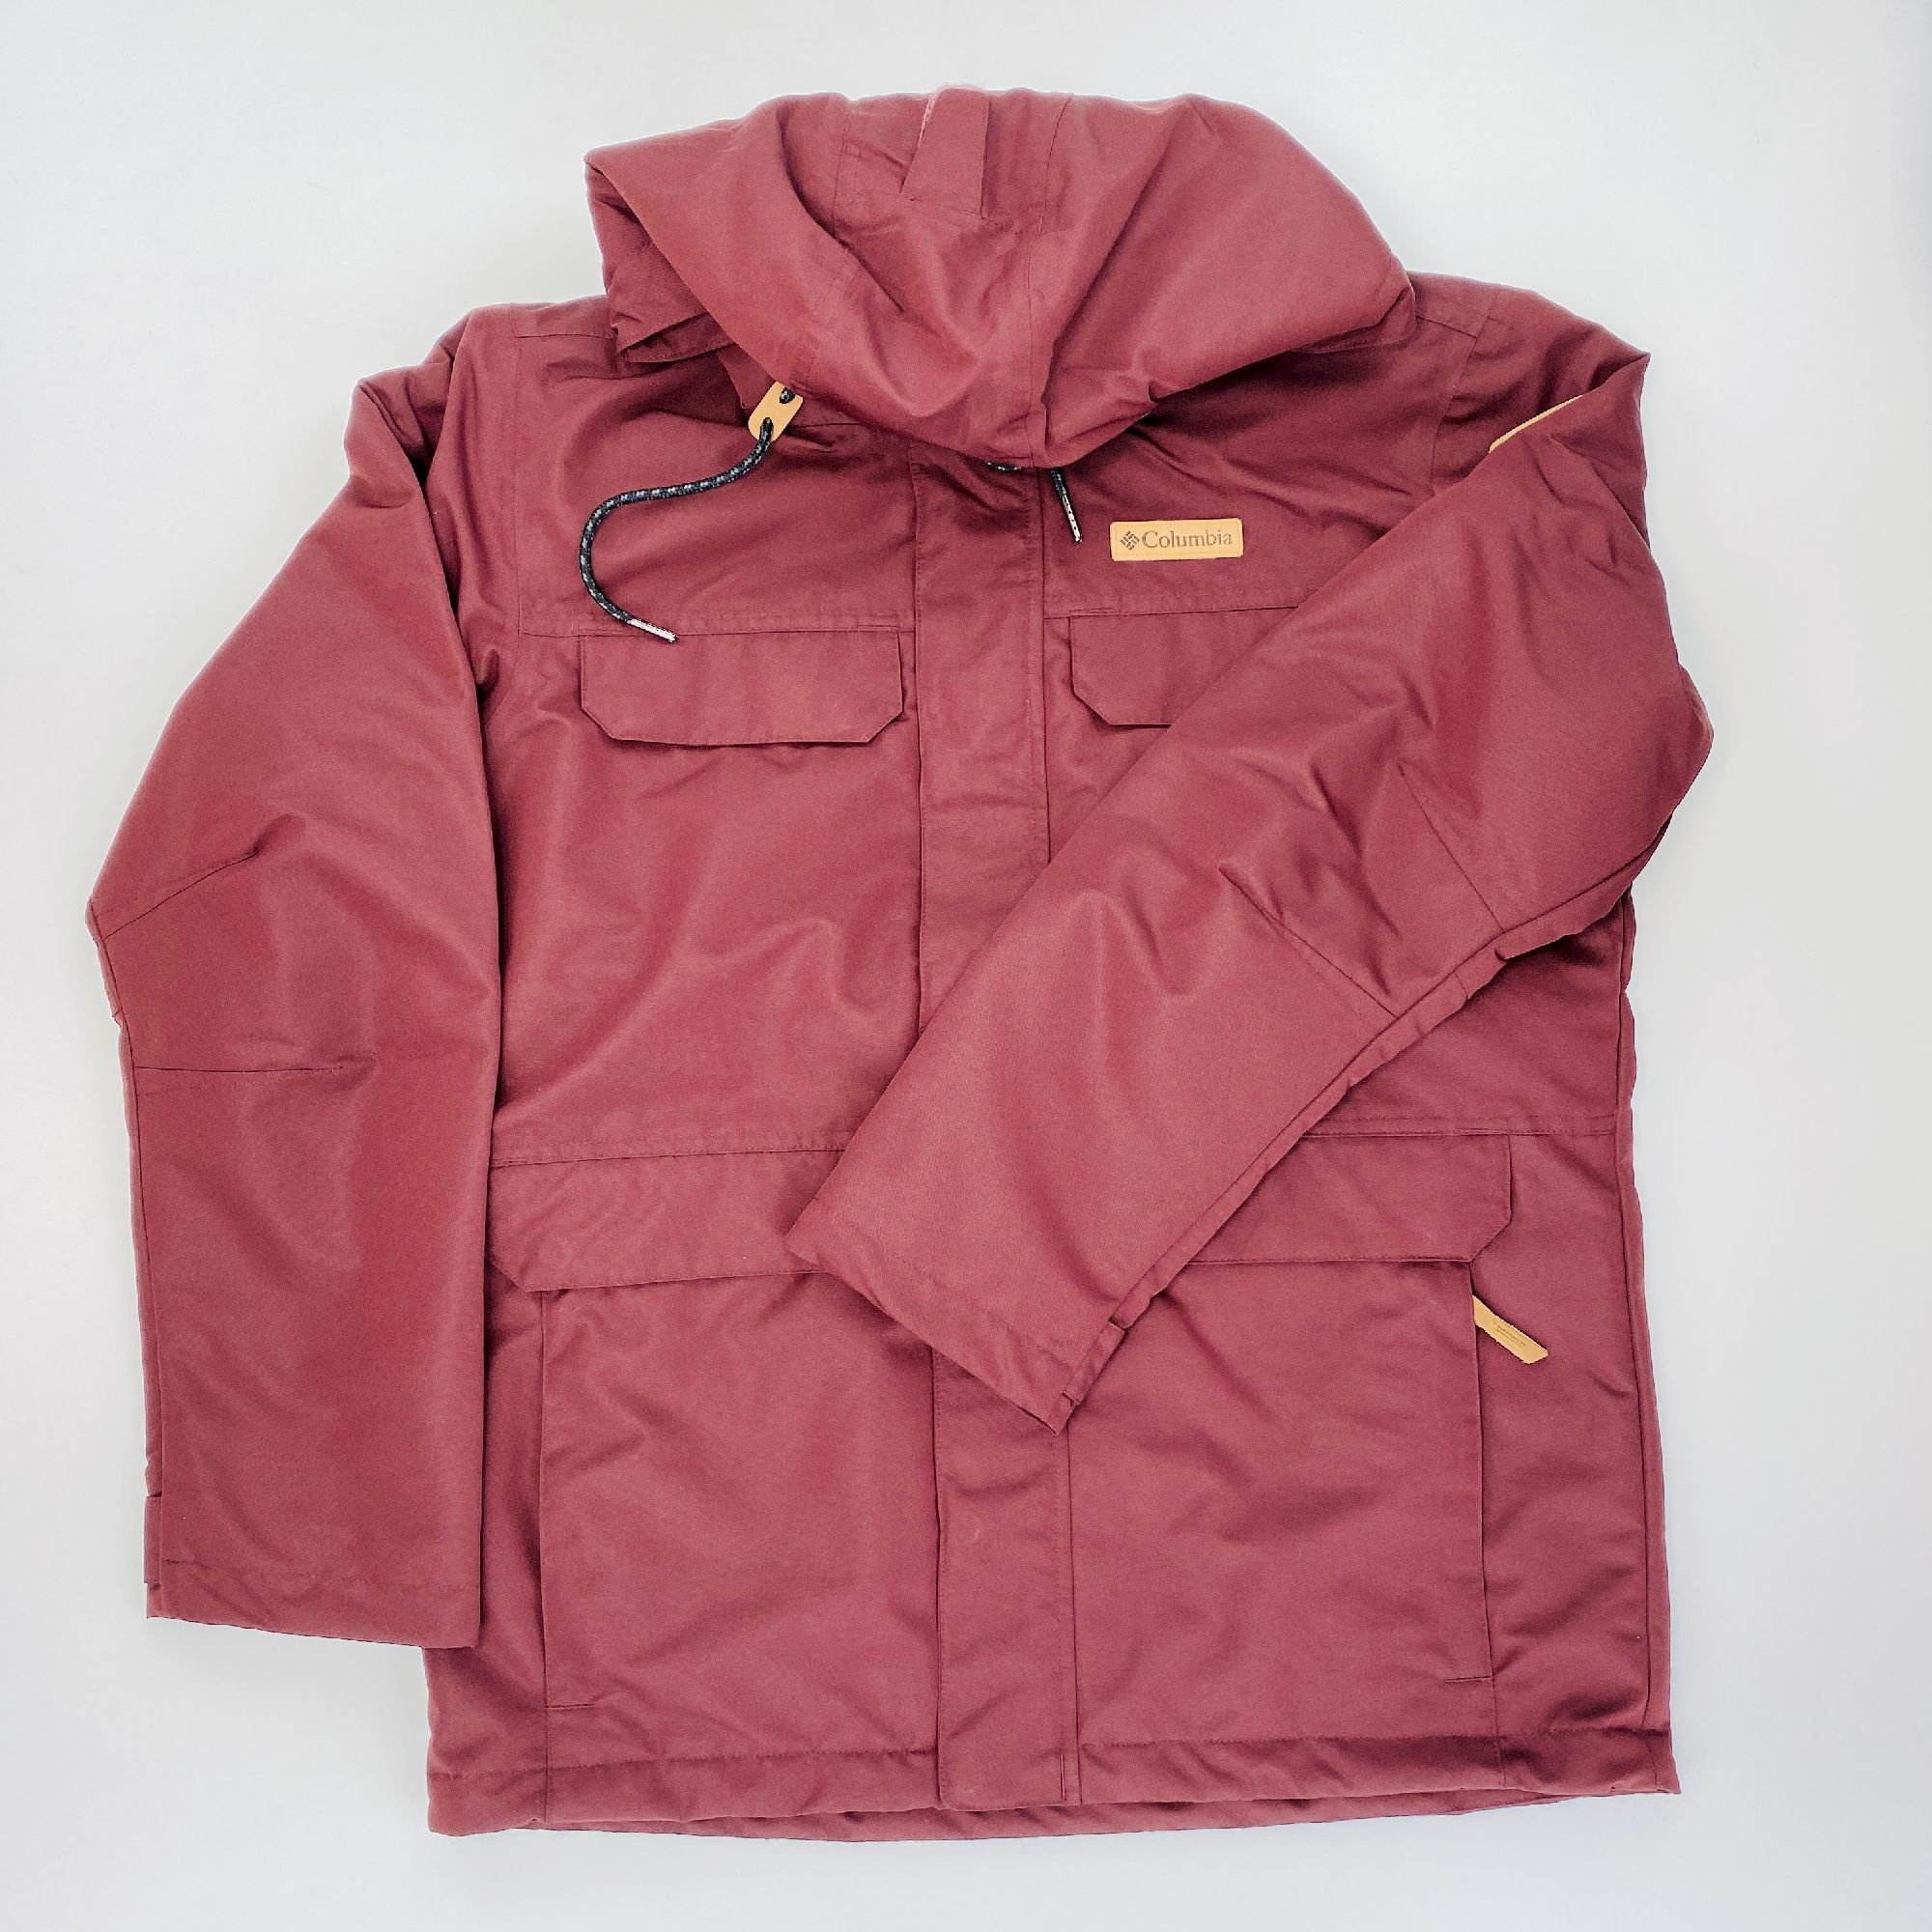 Columbia South Canyon™ Lined Jacket - Seconde main Veste homme - Rouge - M | Hardloop